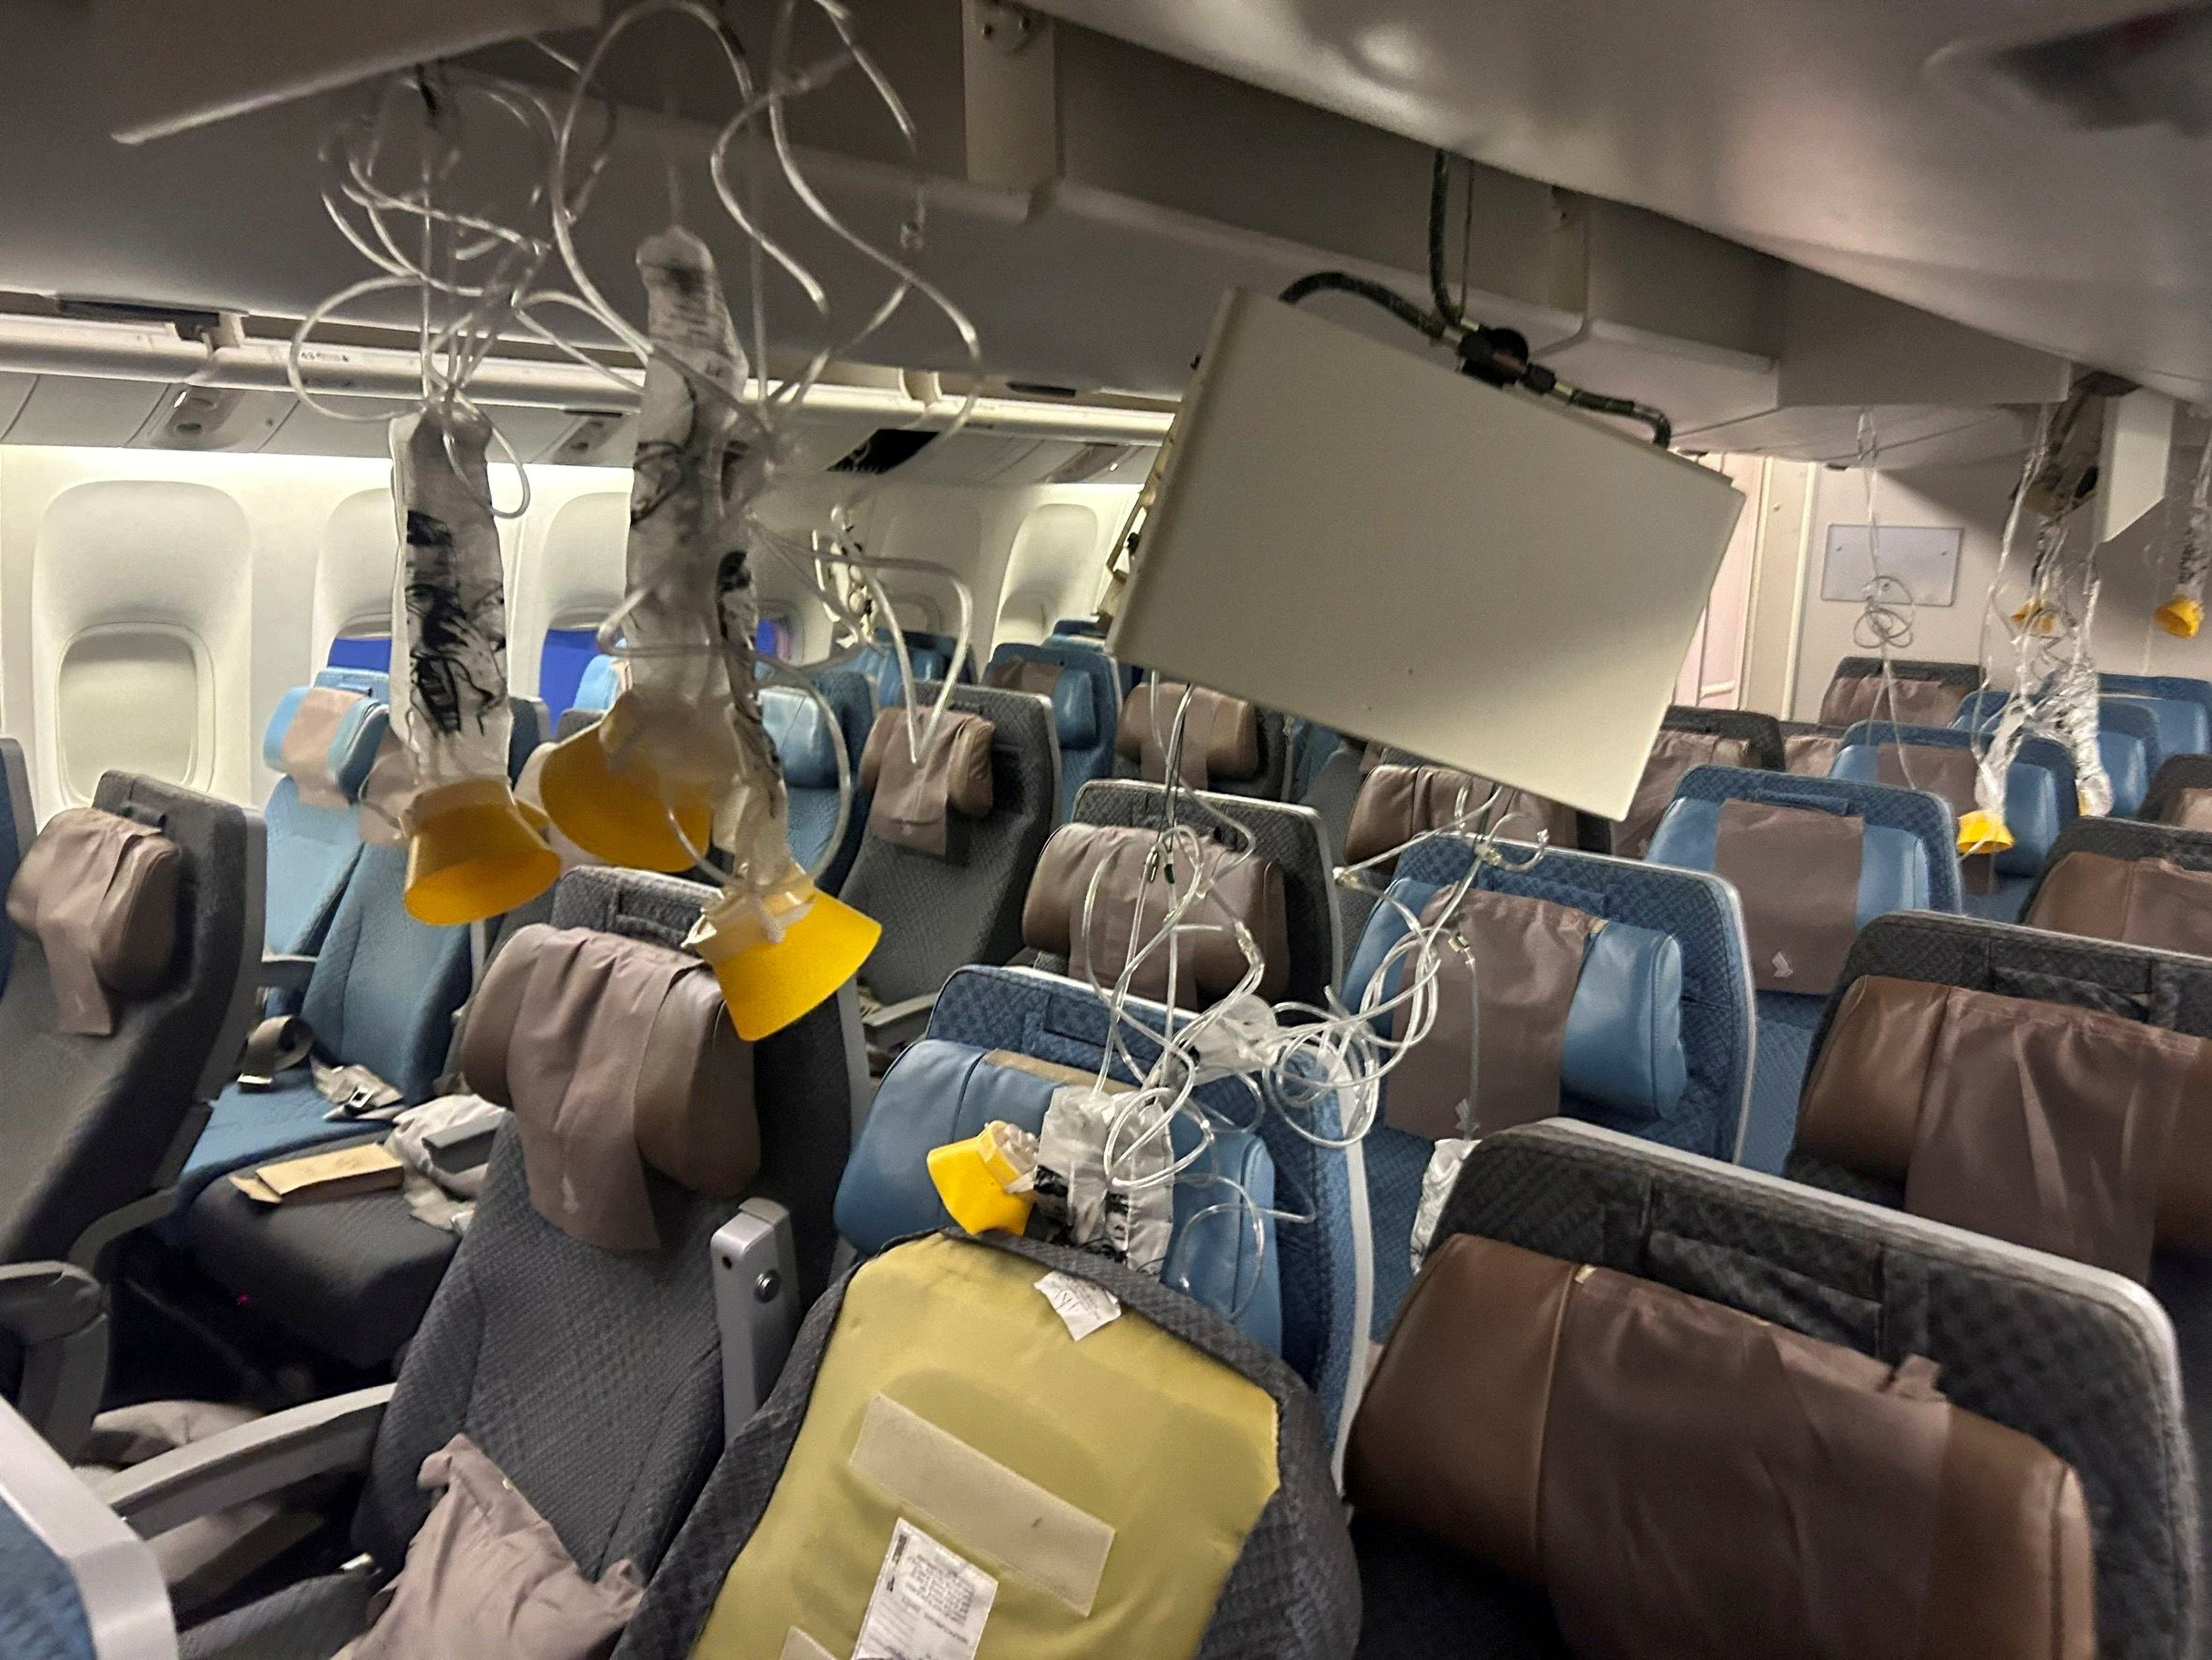 The interior of Singapore Airline flight SQ321 is pictured after an emergency landing at Bangkok’s Suvarnabhumi International Airport. Photo: Reuters 